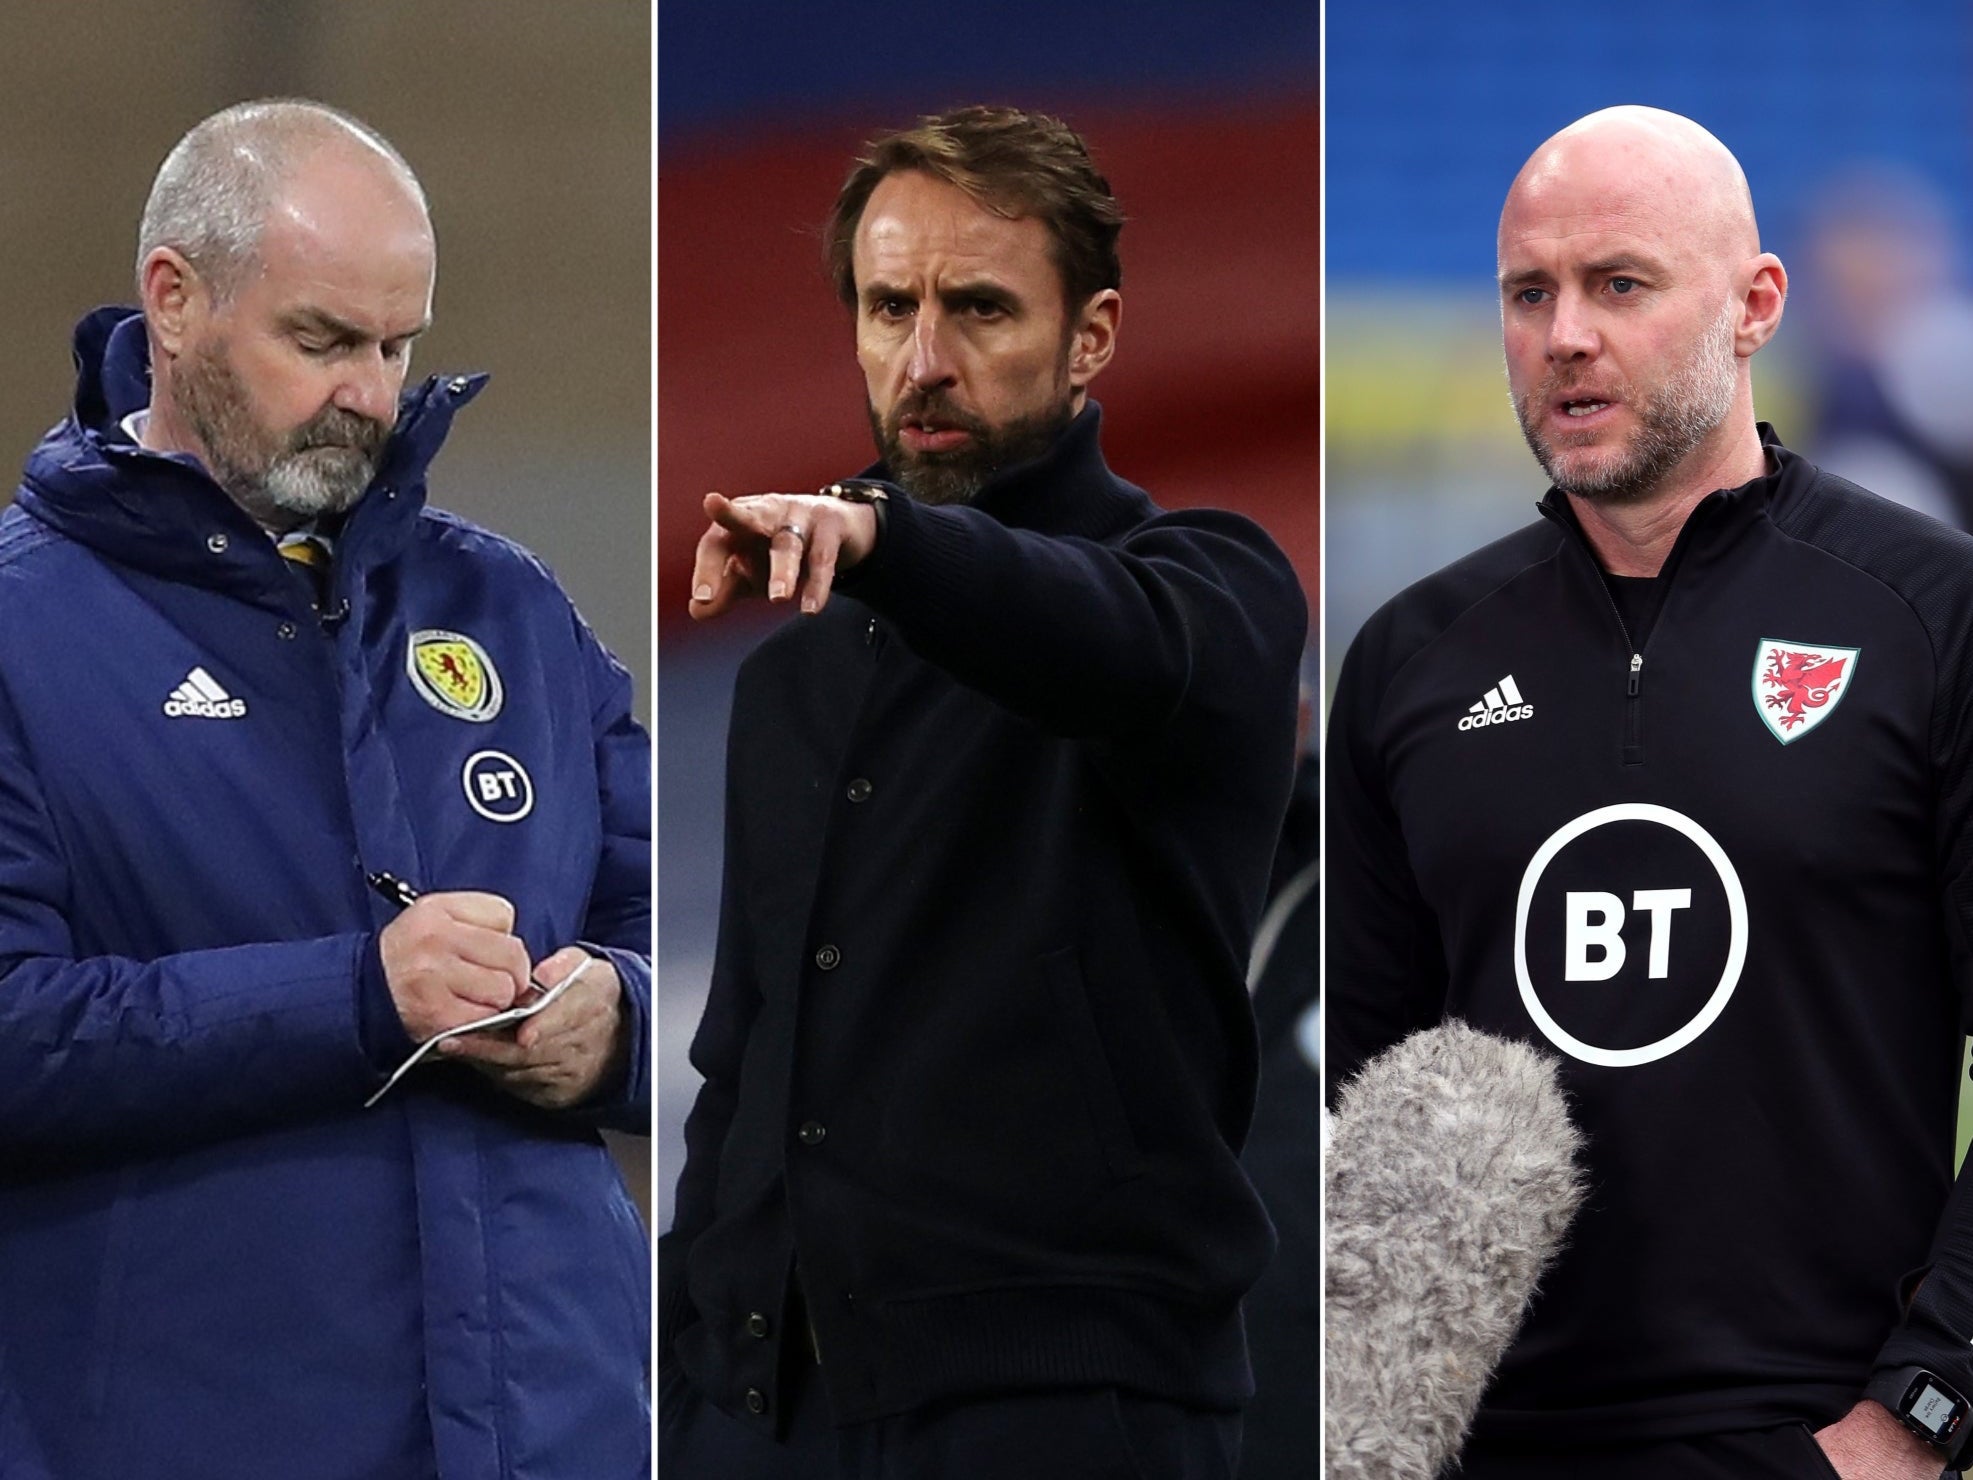 Steve Clarke, Gareth Southgate and Robert Page (left to right) are all still on course to take their teams to the 2022 World Cup (Jane Barlow/Adrian Dennis/Nick Potts/PA)